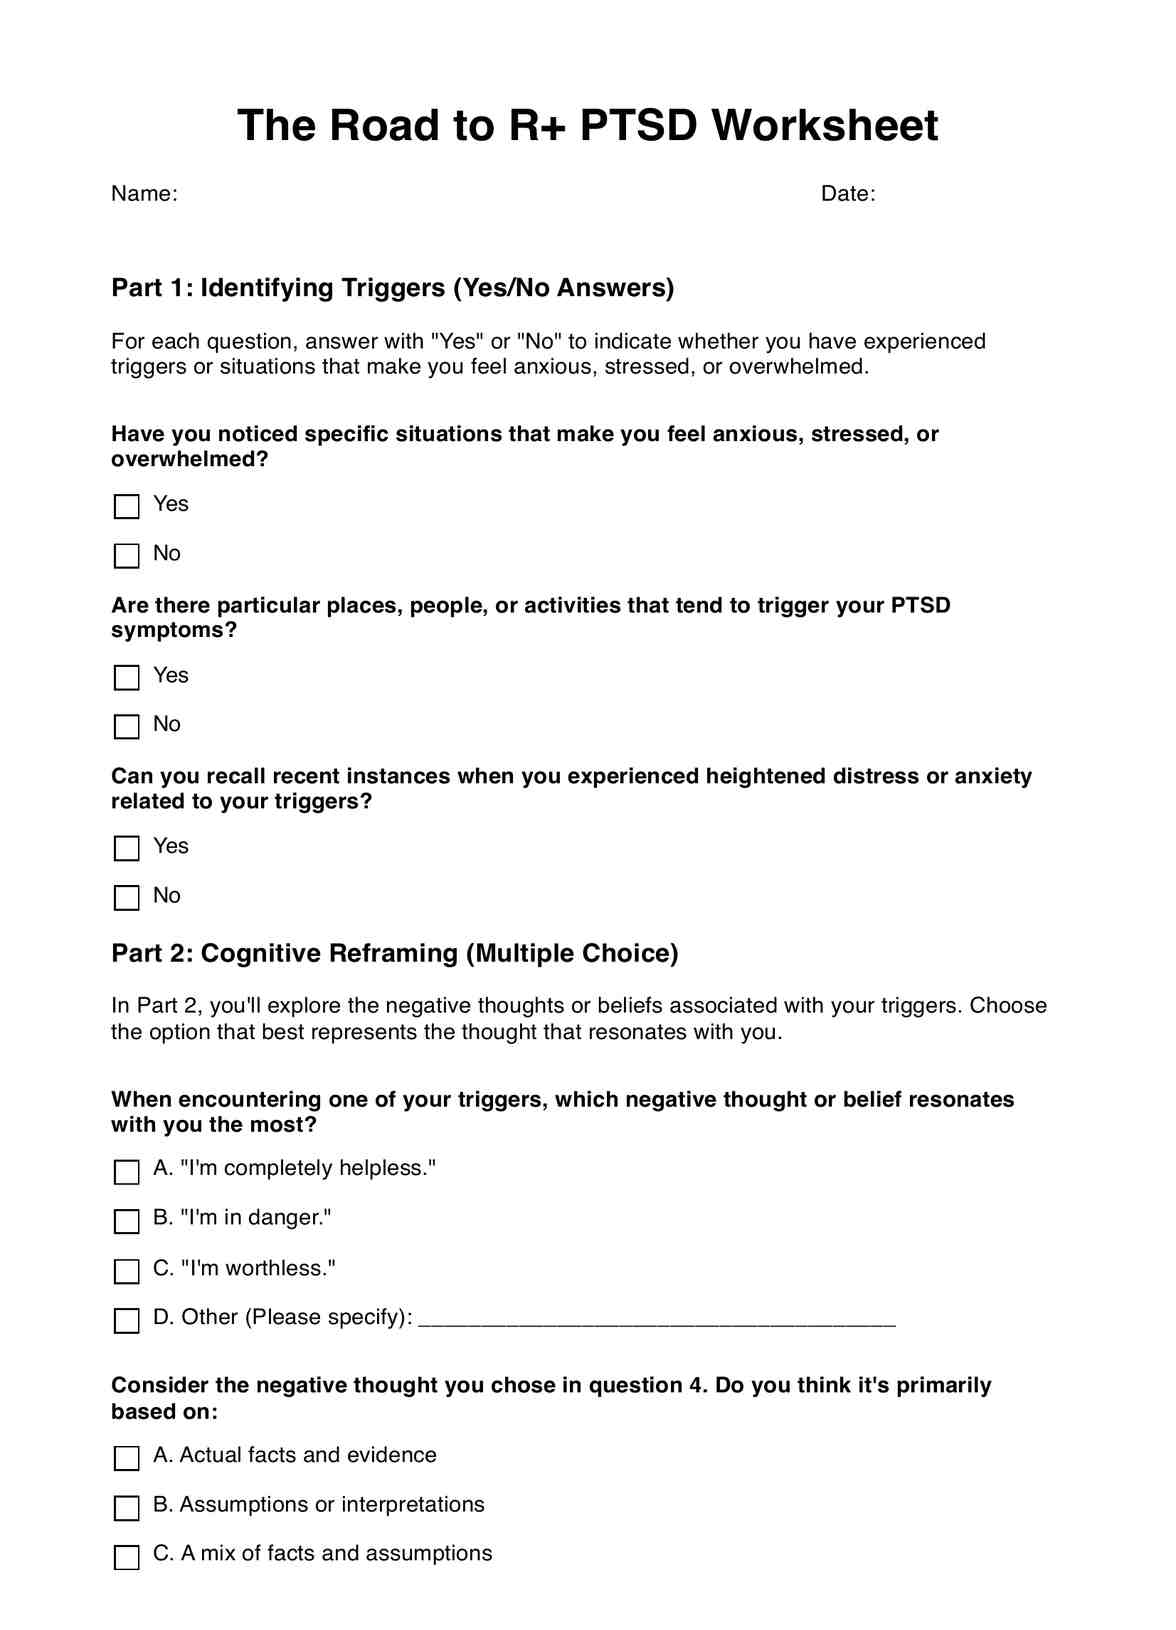 The Road to R+ PTSD Worksheet PDF Example